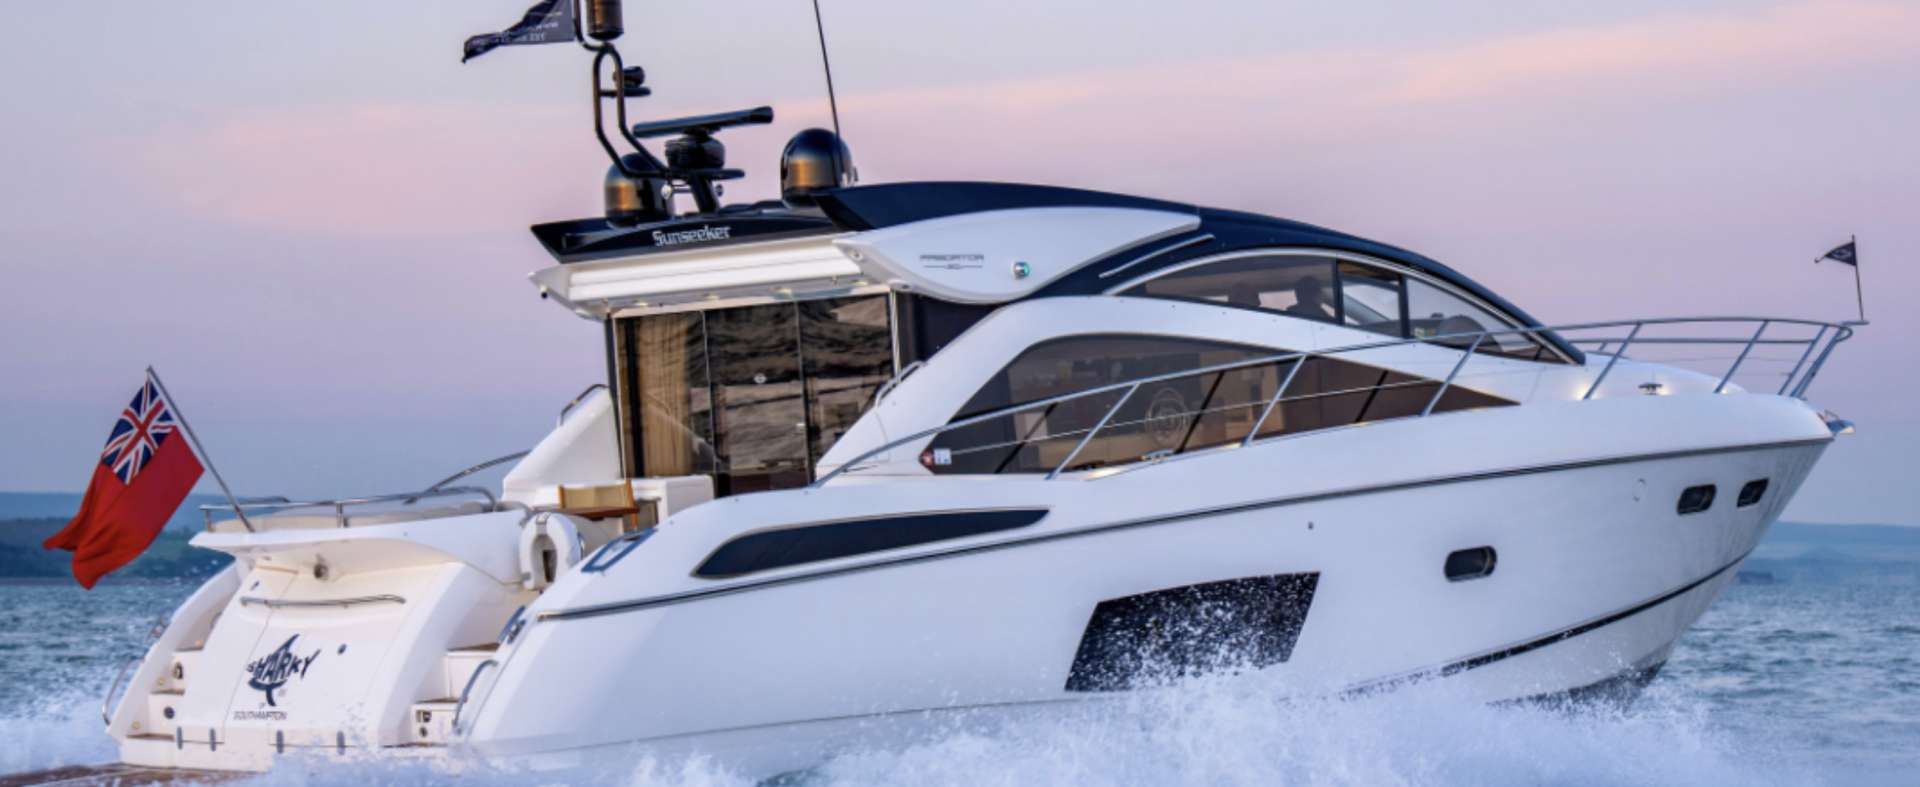 Predator 60 - Yacht Charter The Solent & Boat hire in United Kingdom England The Solent Southampton Southampton 2